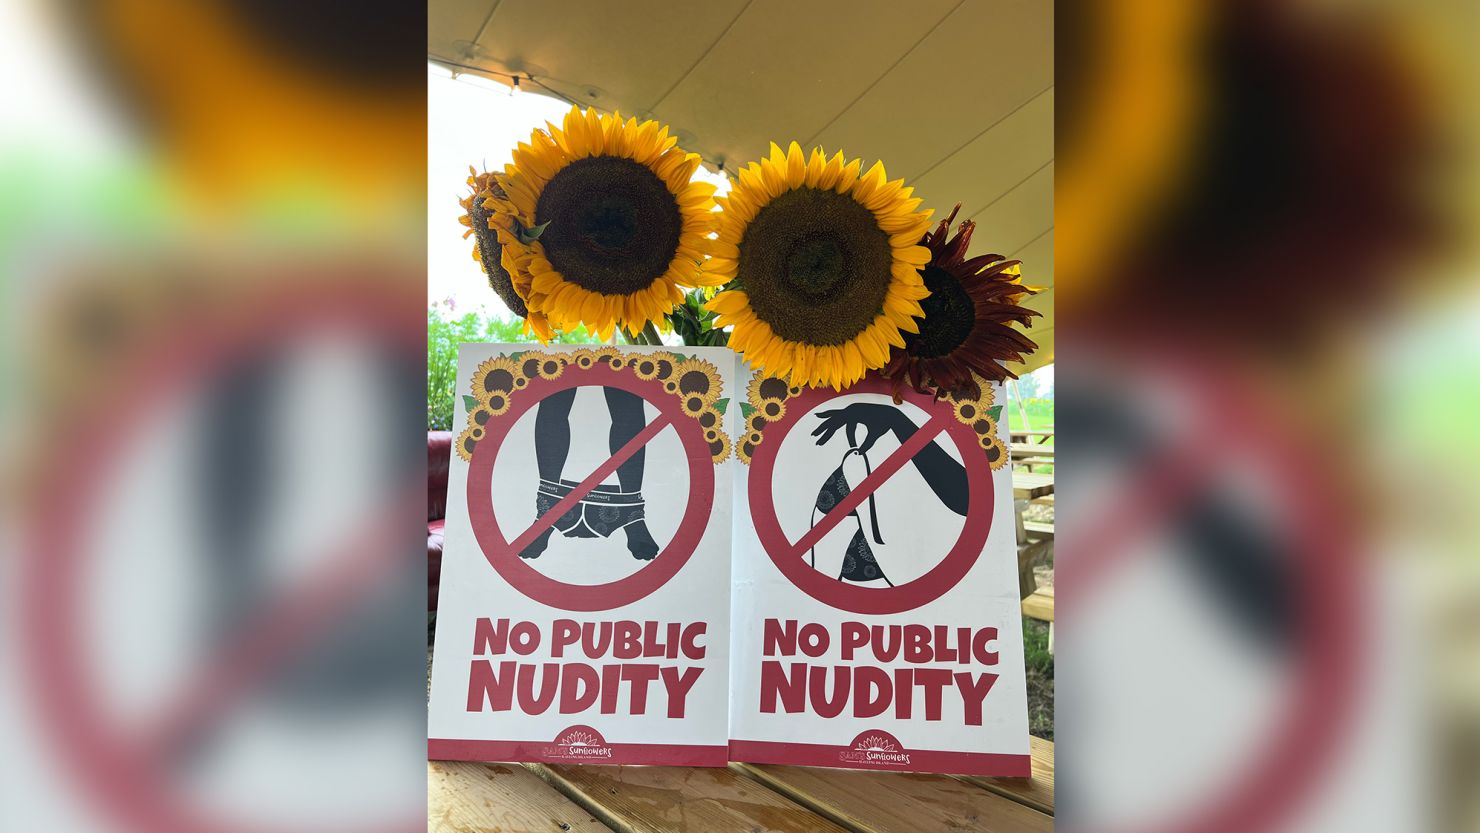 A British farm complained people were stripping naked in its sunflower fields.